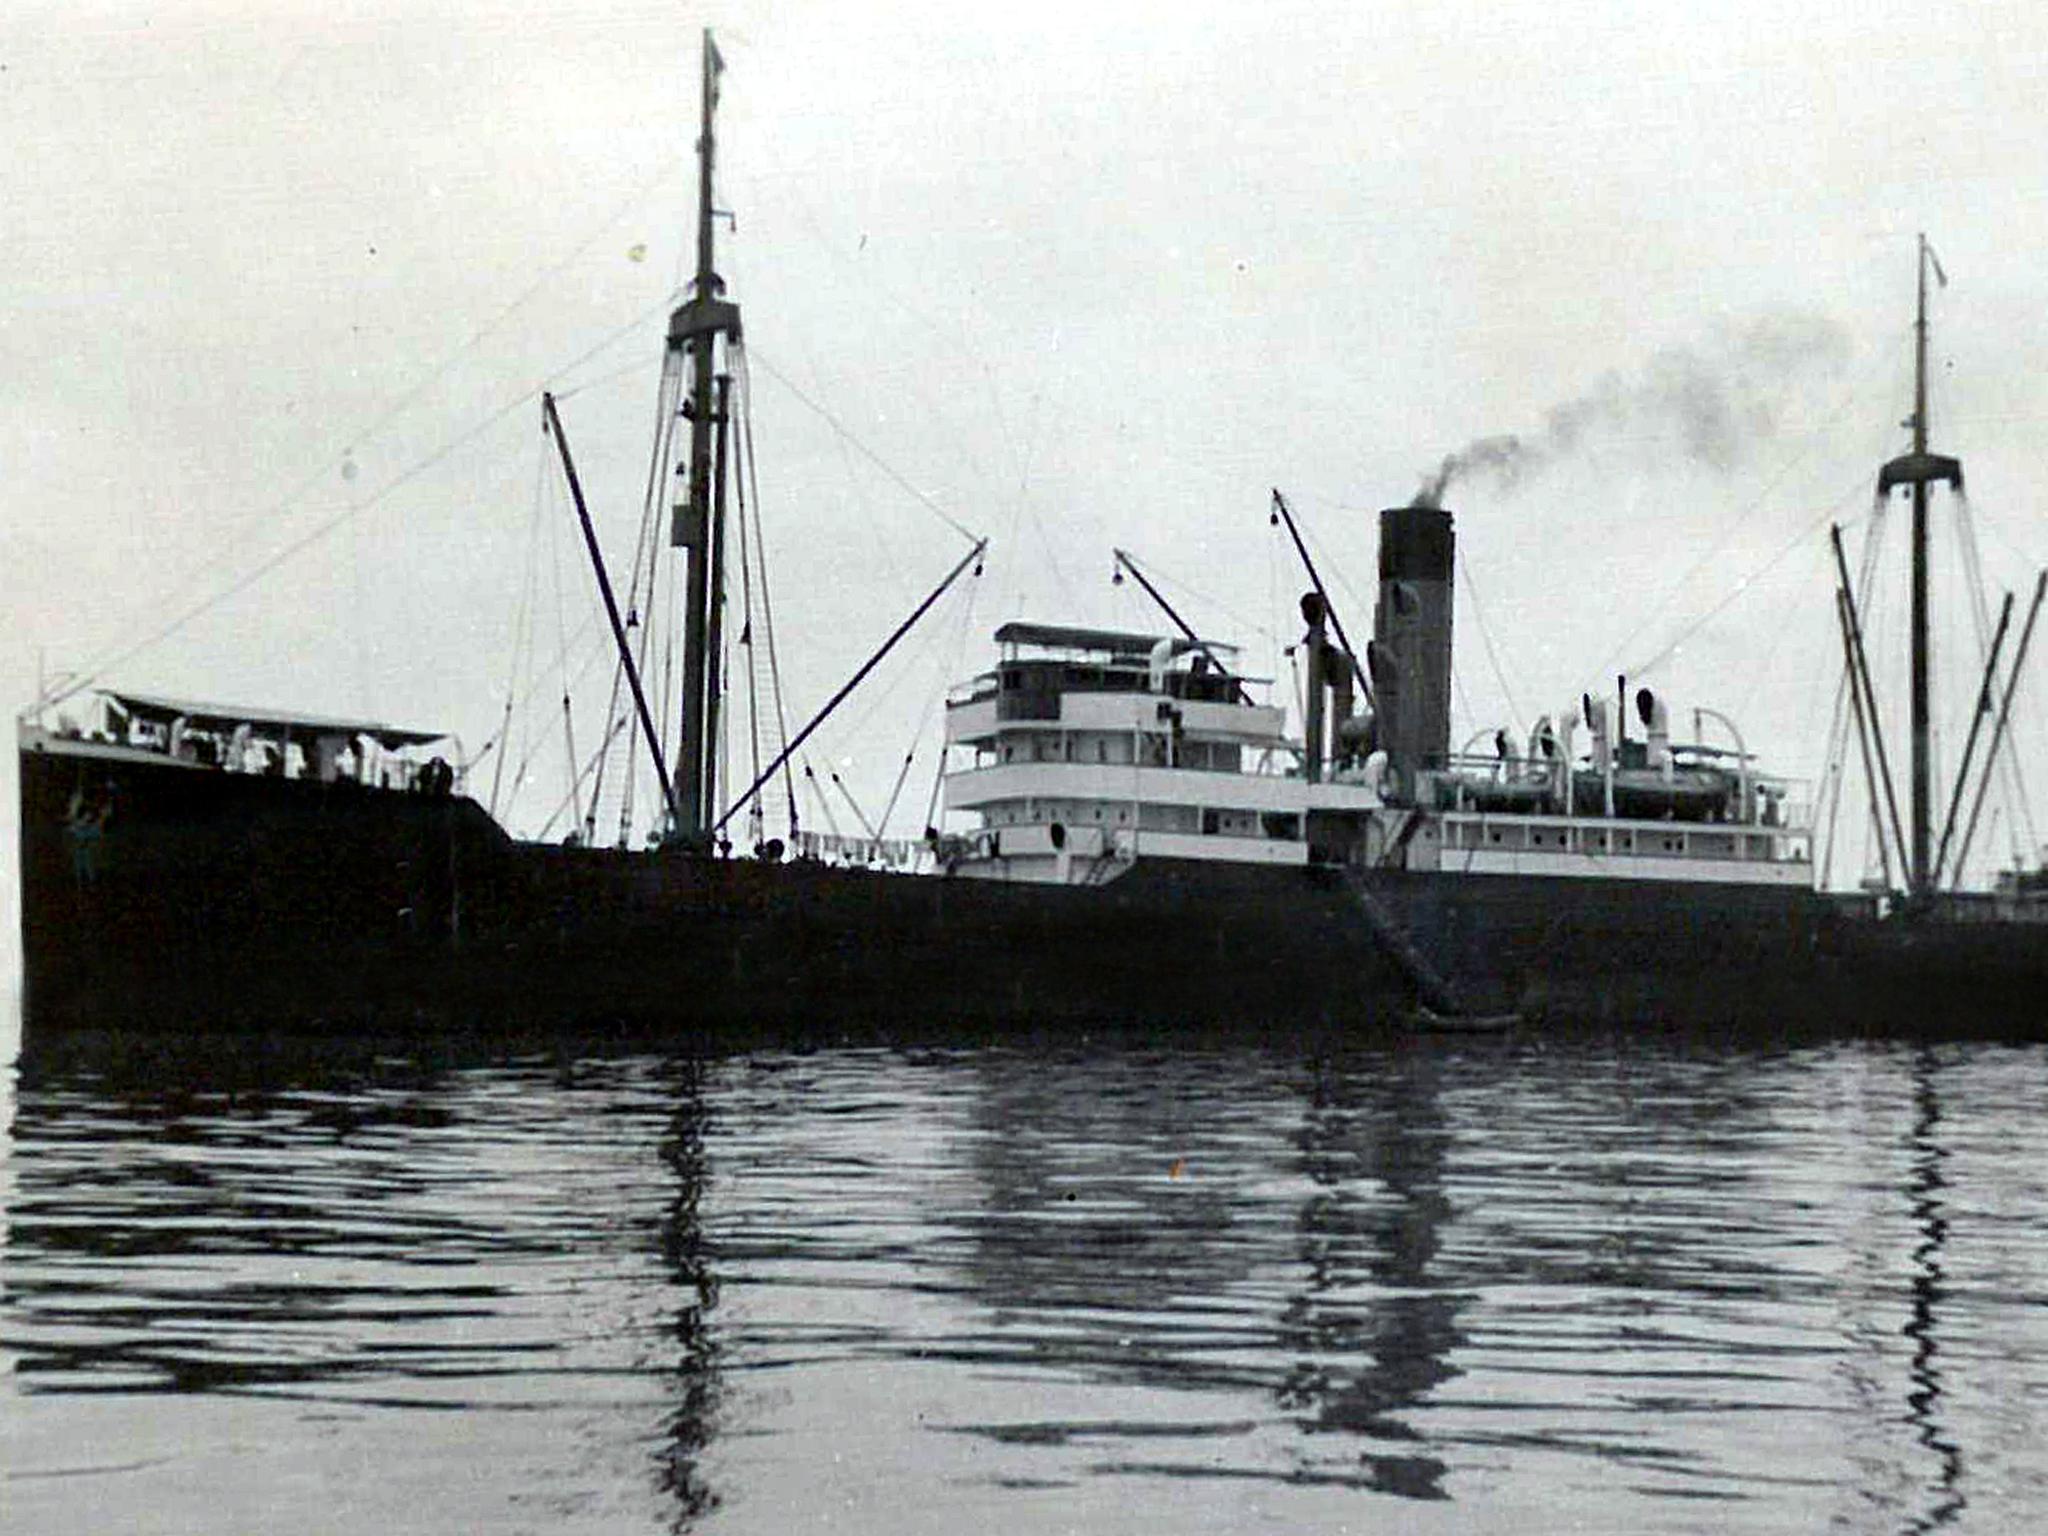 The SS Minden was the sister ship to the SS Porta